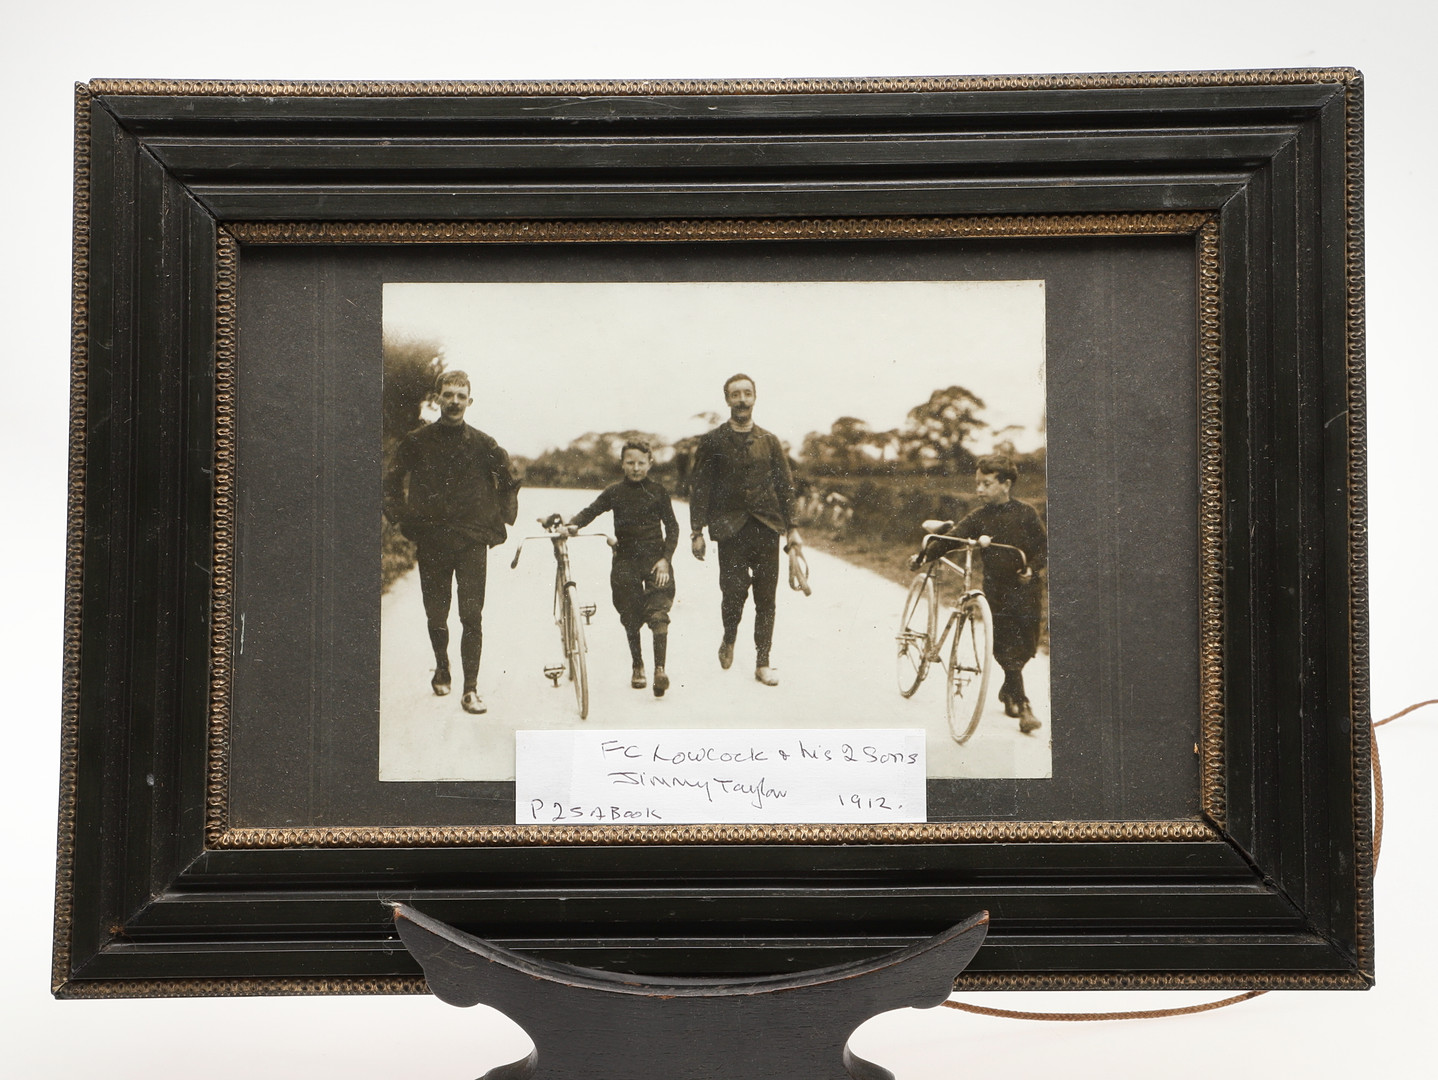 LARGE COLLECTION OF EARLY CYCLING GOLD & SILVER MEDALS, & EPHEMERA - FREDERICK LOWCOCK. - Image 86 of 155